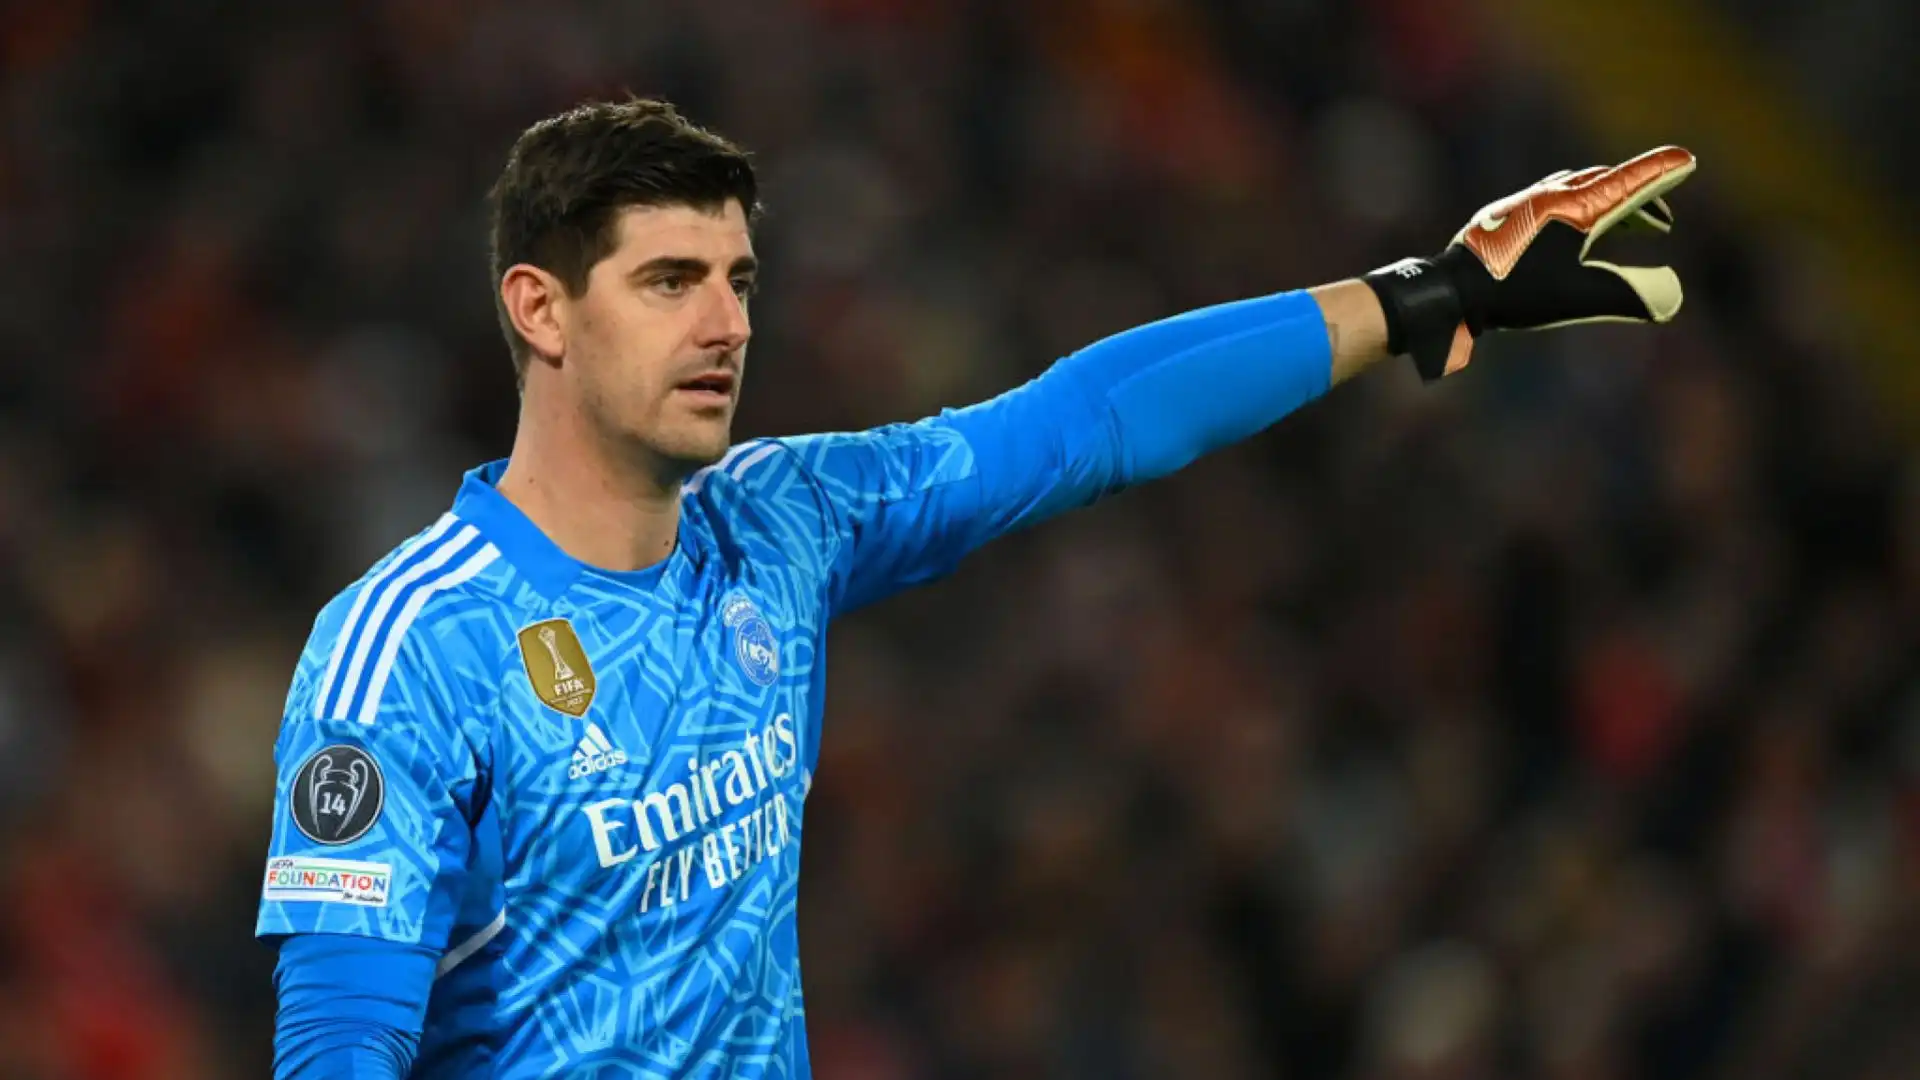 Portiere: Thibaut Courtois (Real Madrid)